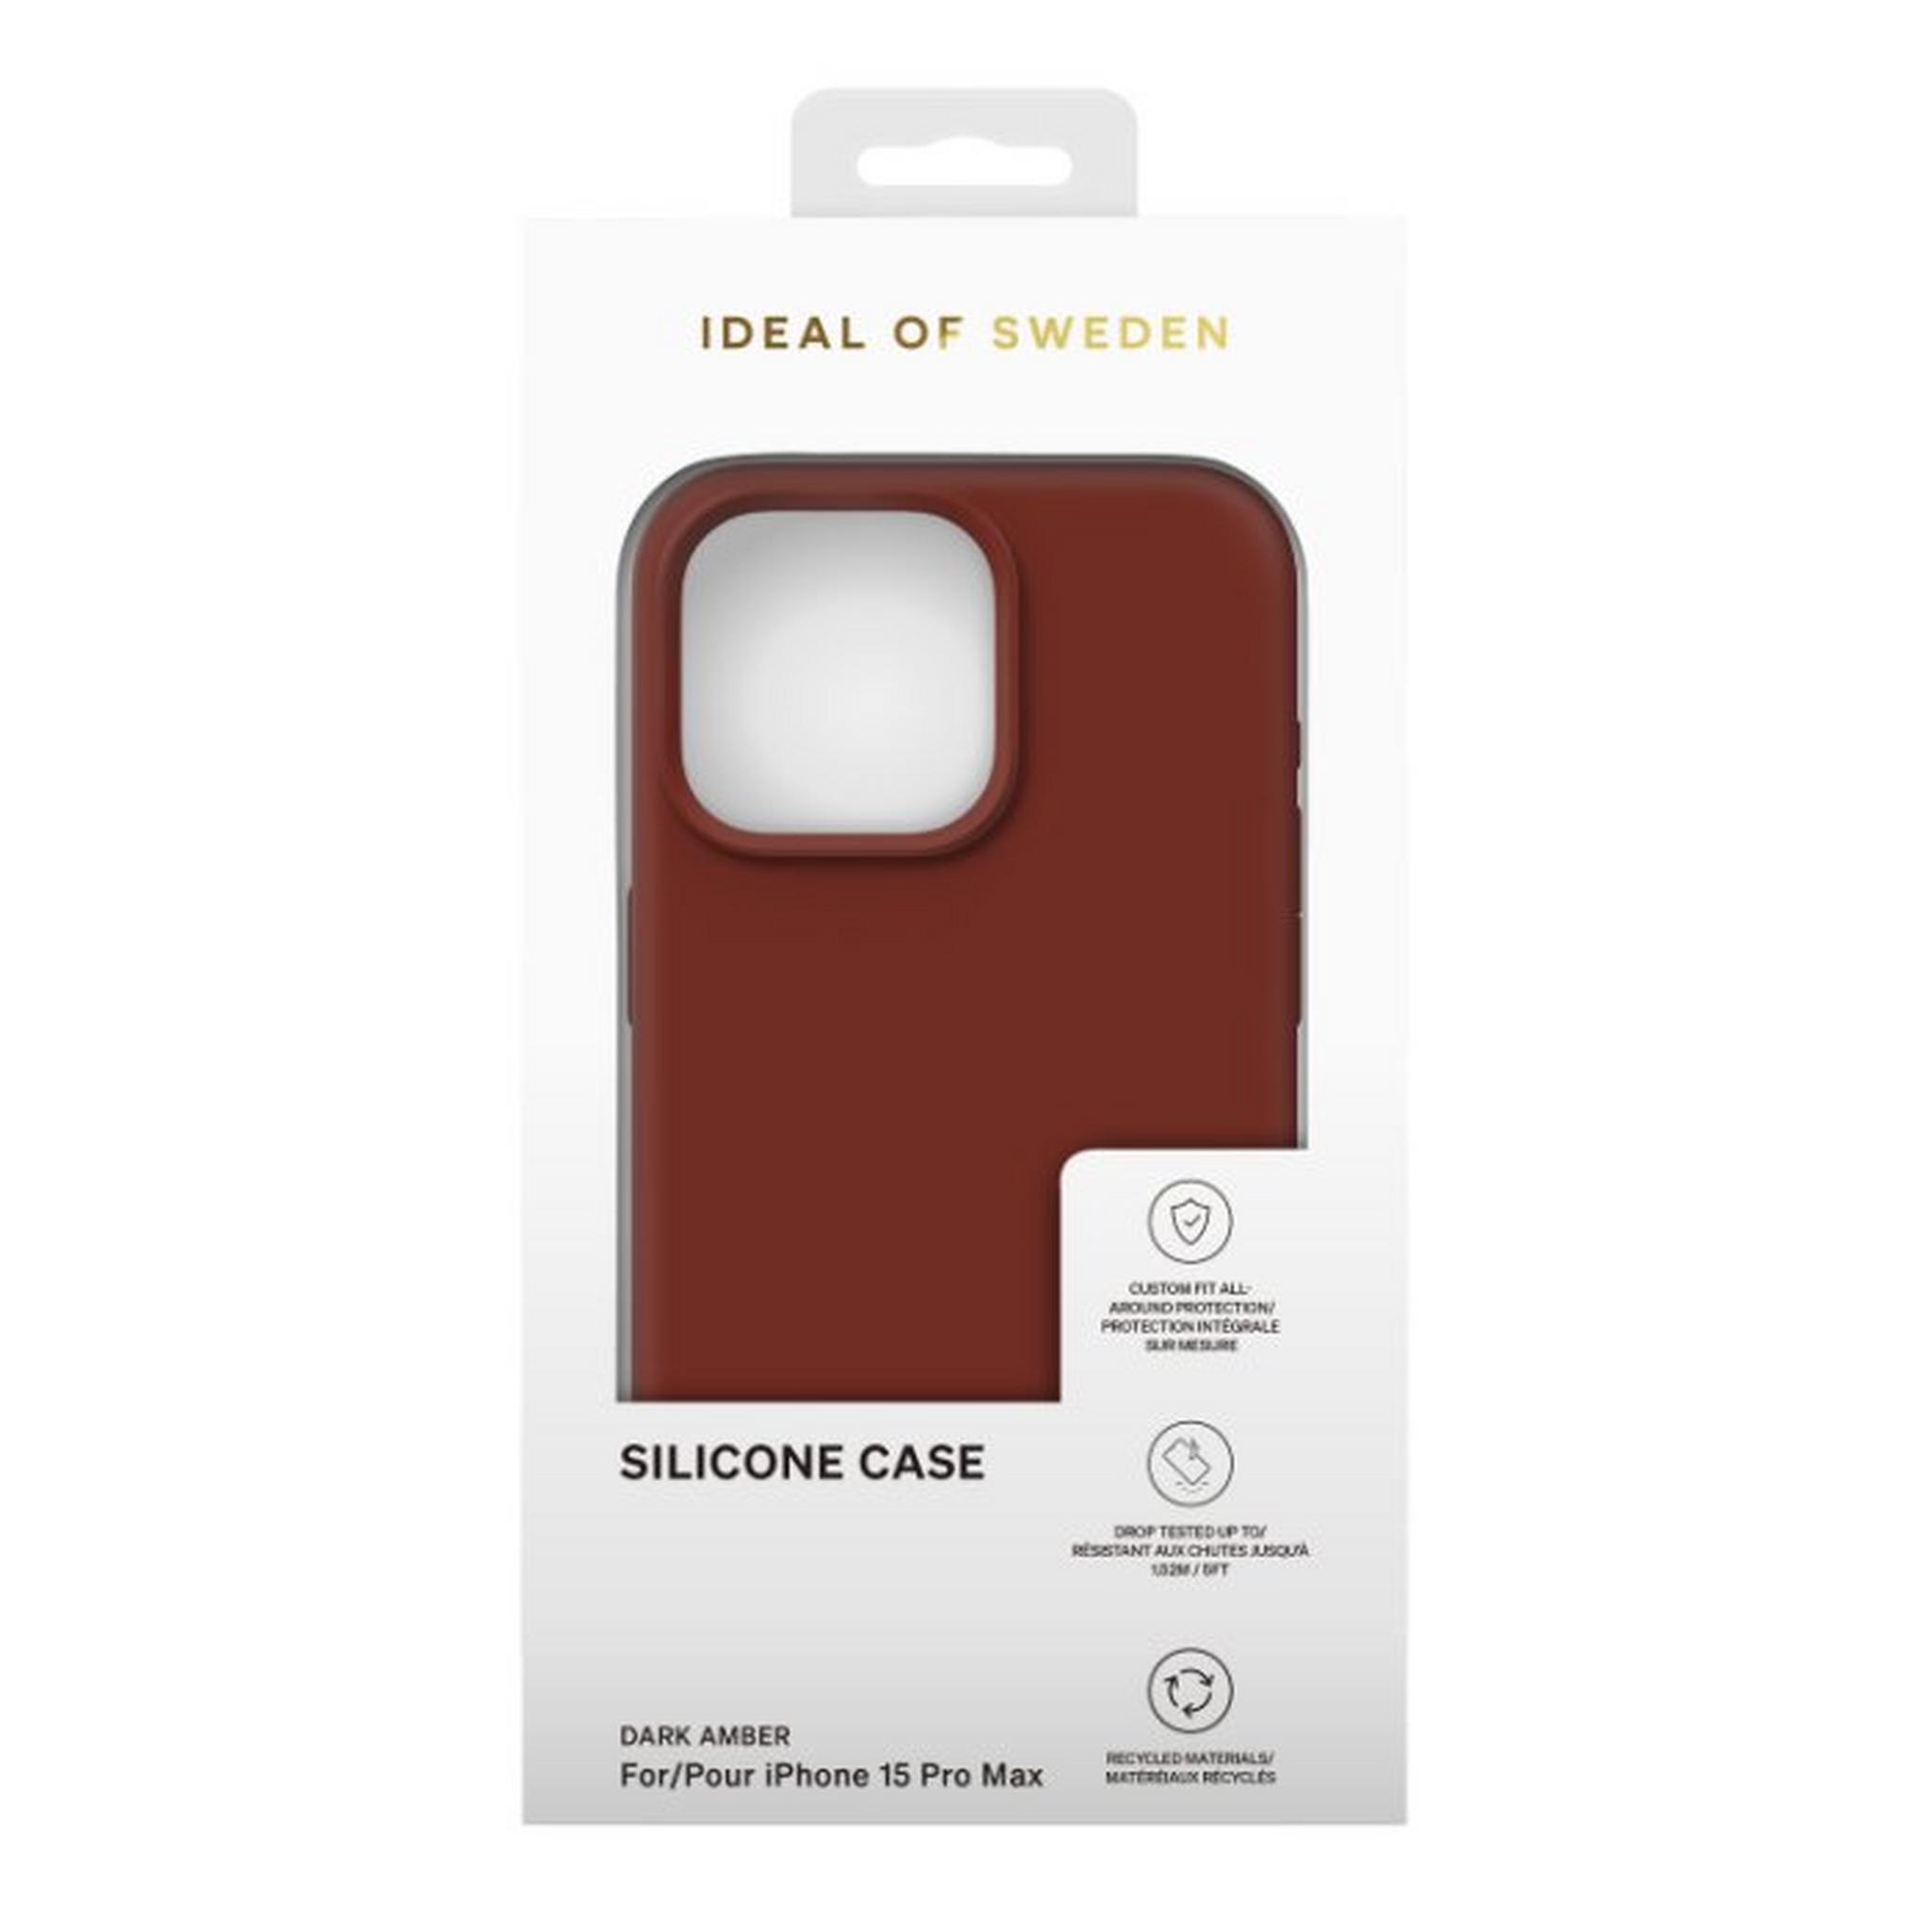 Ideal of Sweden MagSafe Silicone Case for iPhone 15 Pro Max (IDSICMS-I2367P-489) - Dark Amber